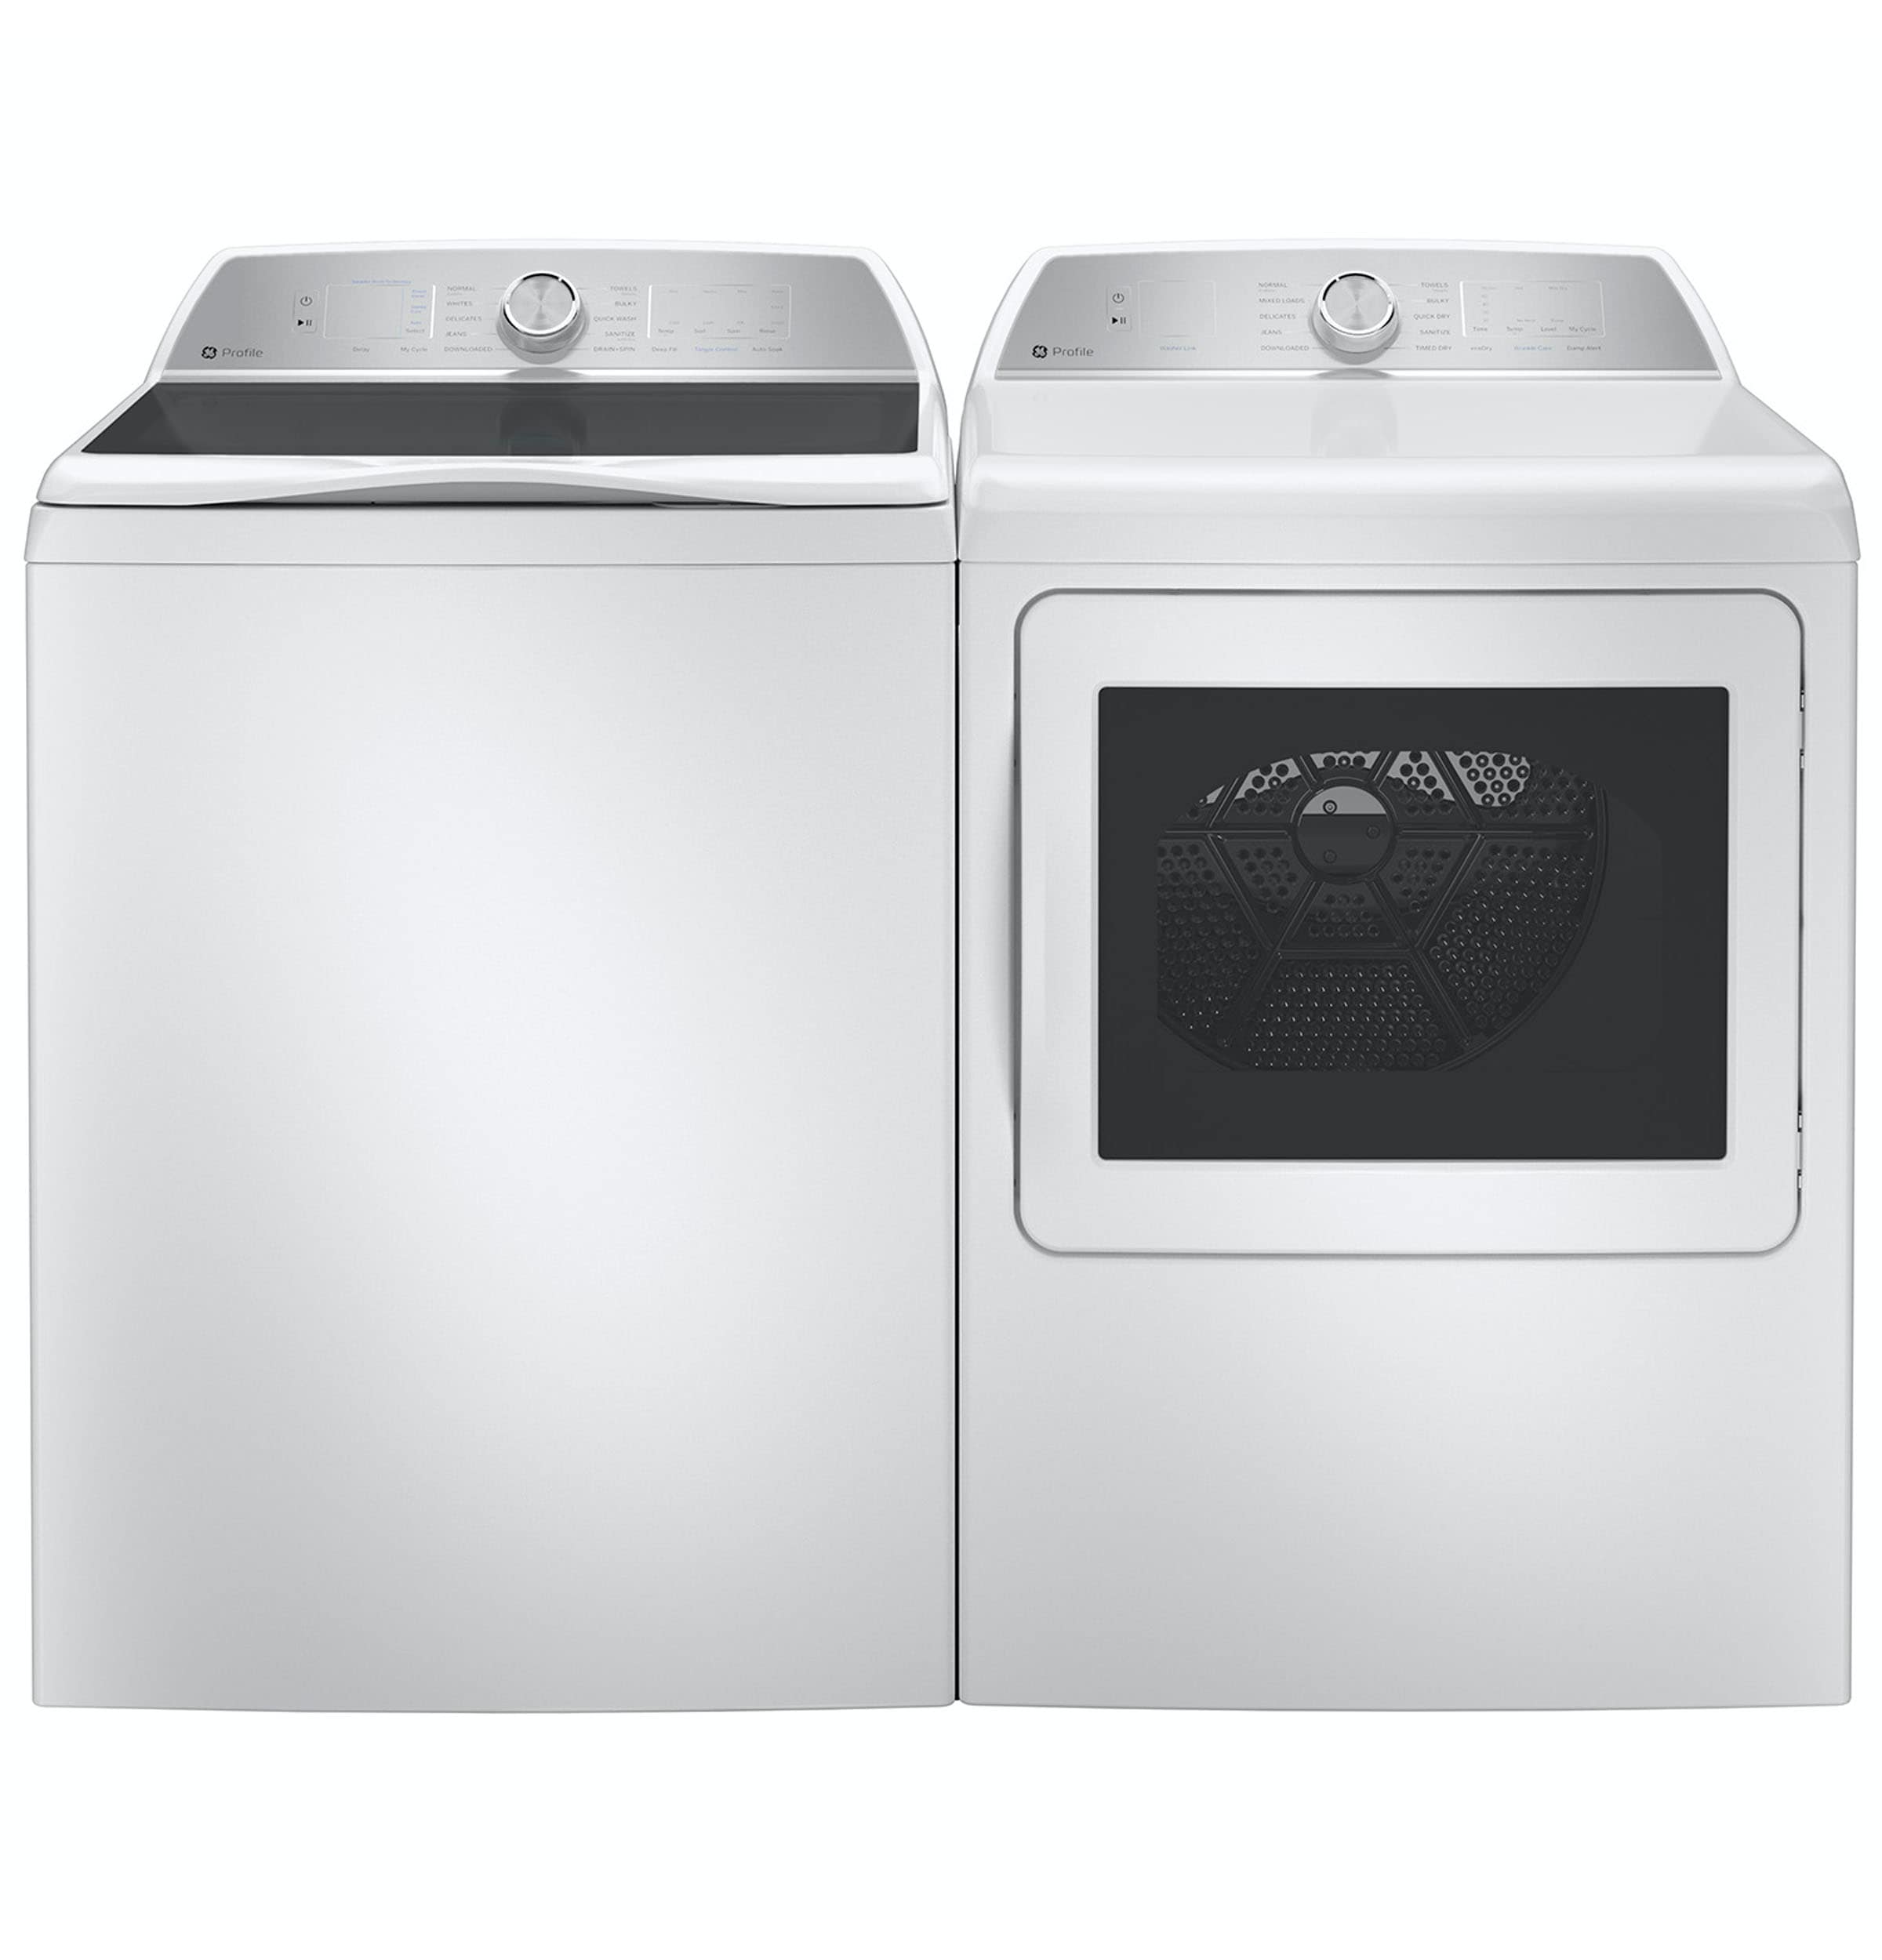 The 5 Best Energy-Efficient Washer/Dryer Sets